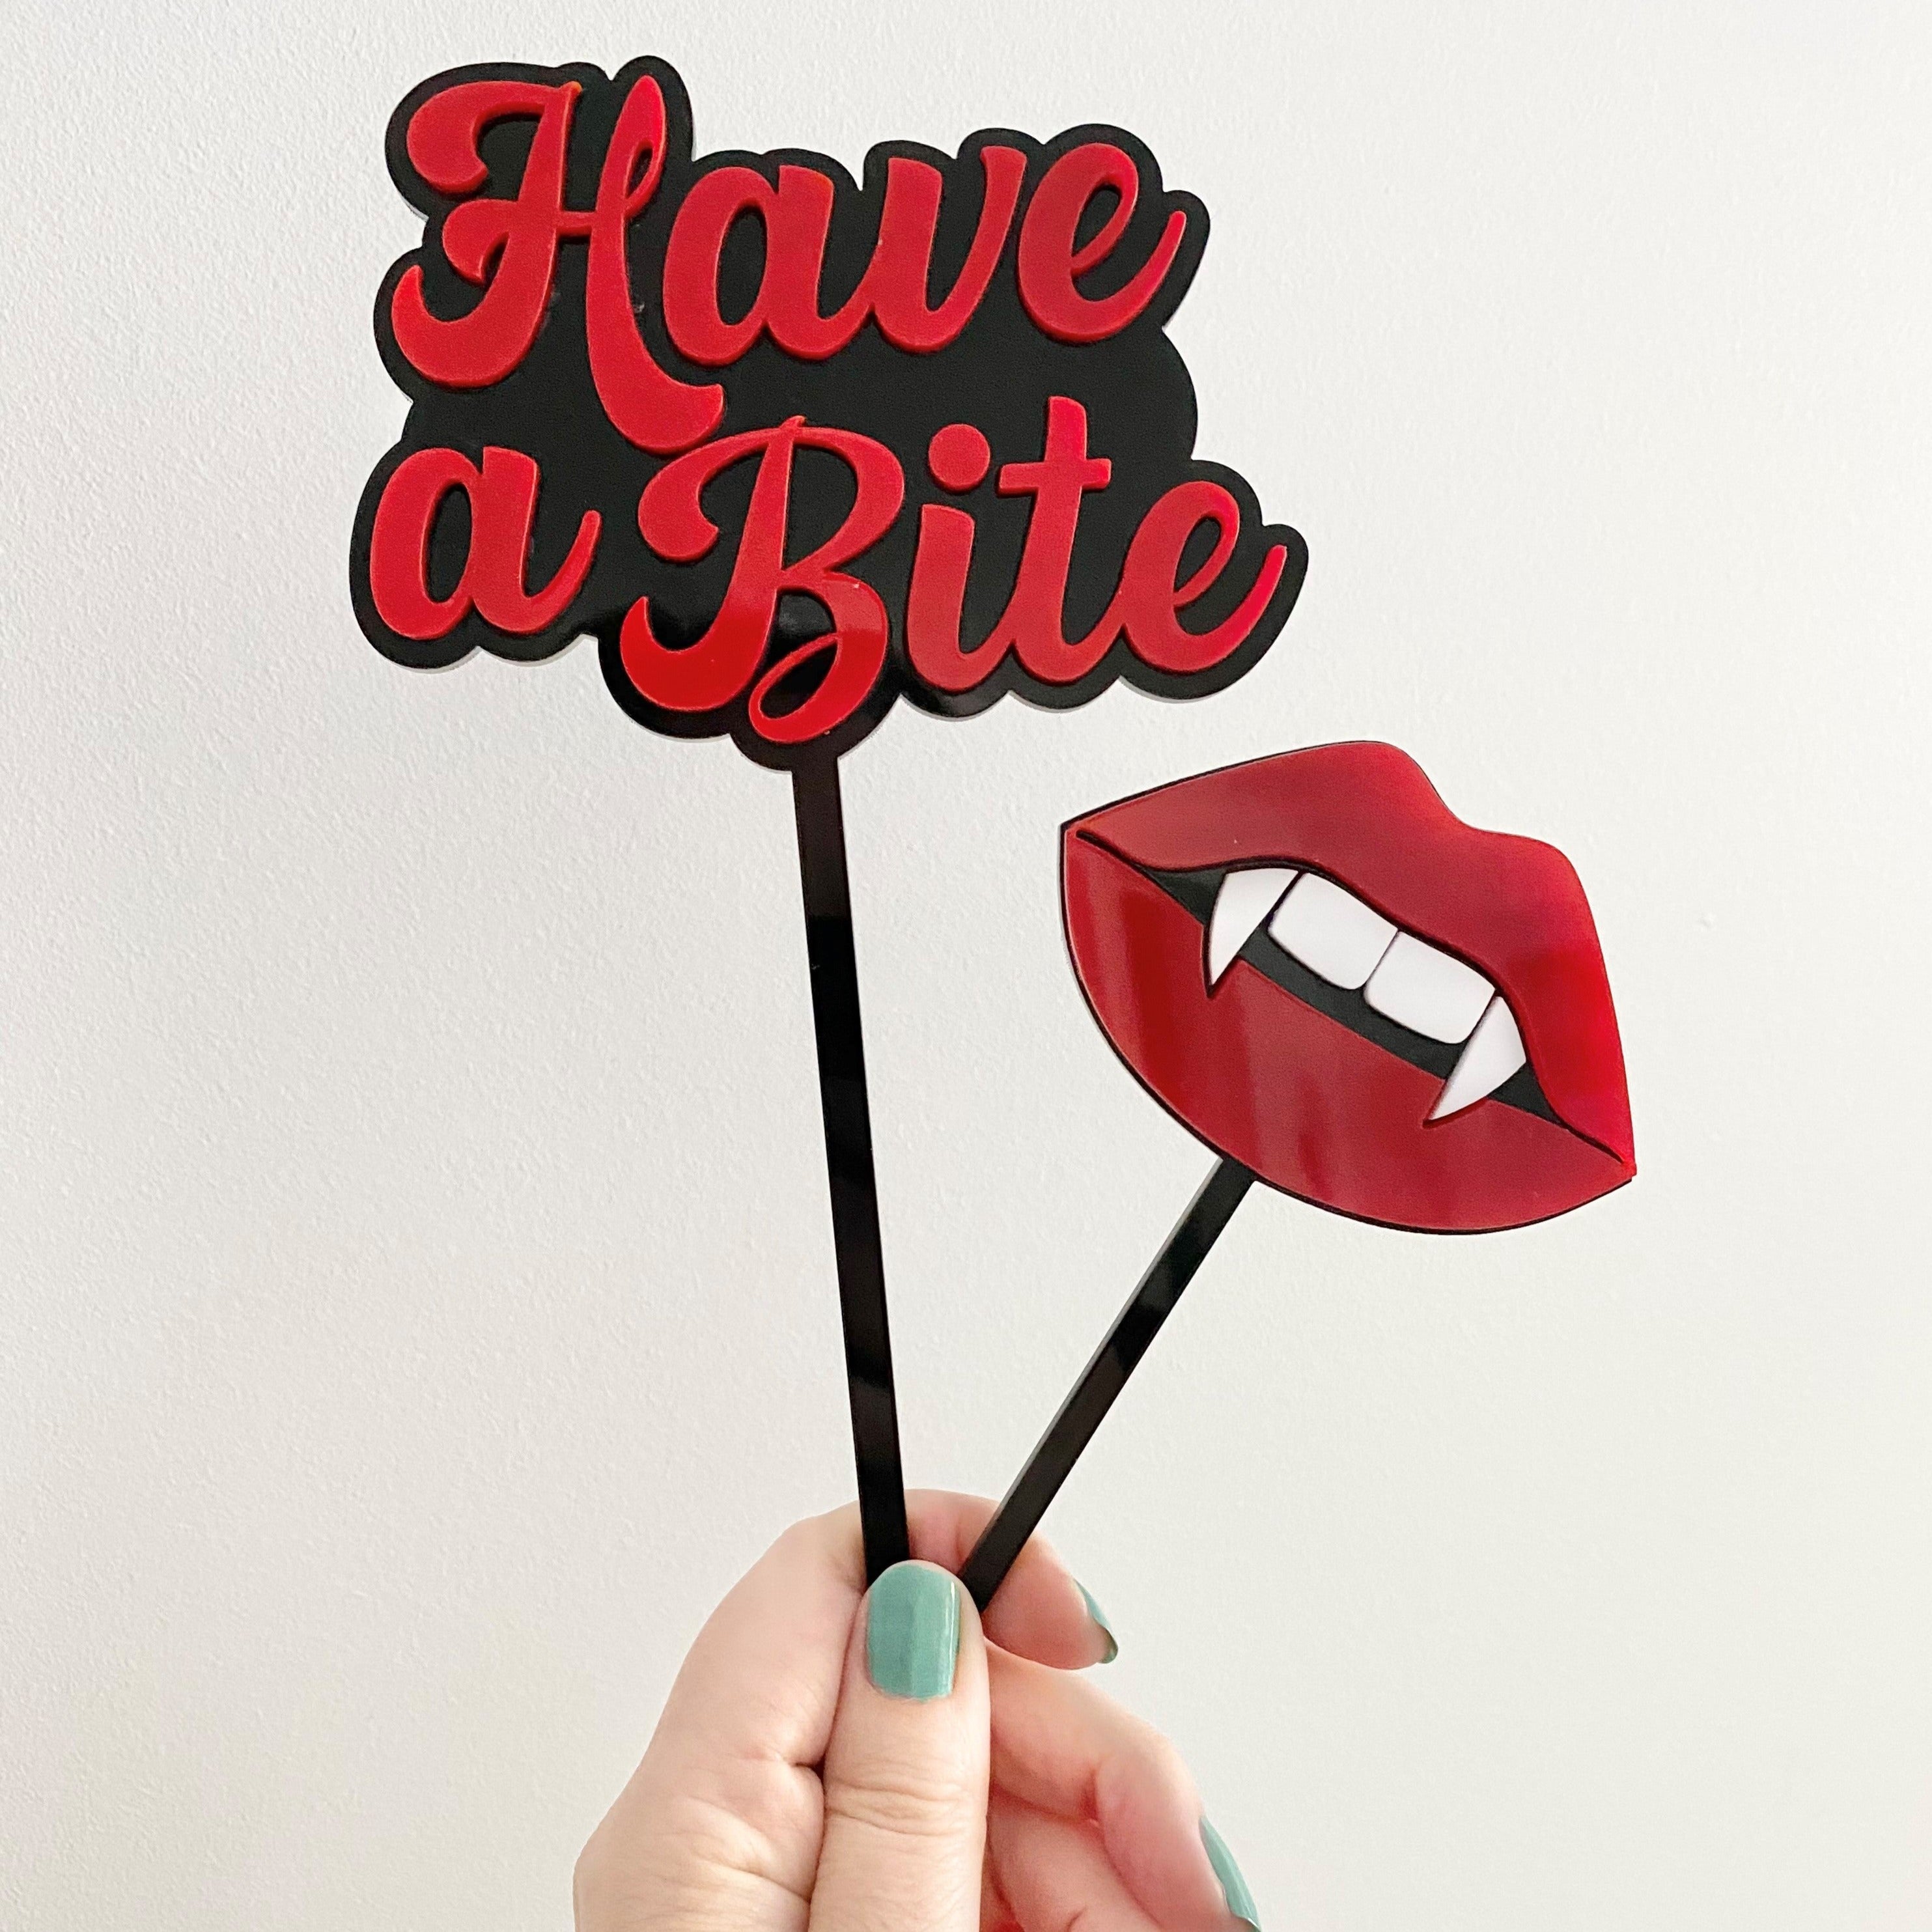 Vampire Lips "Have a Bite" Feature Cake Topper